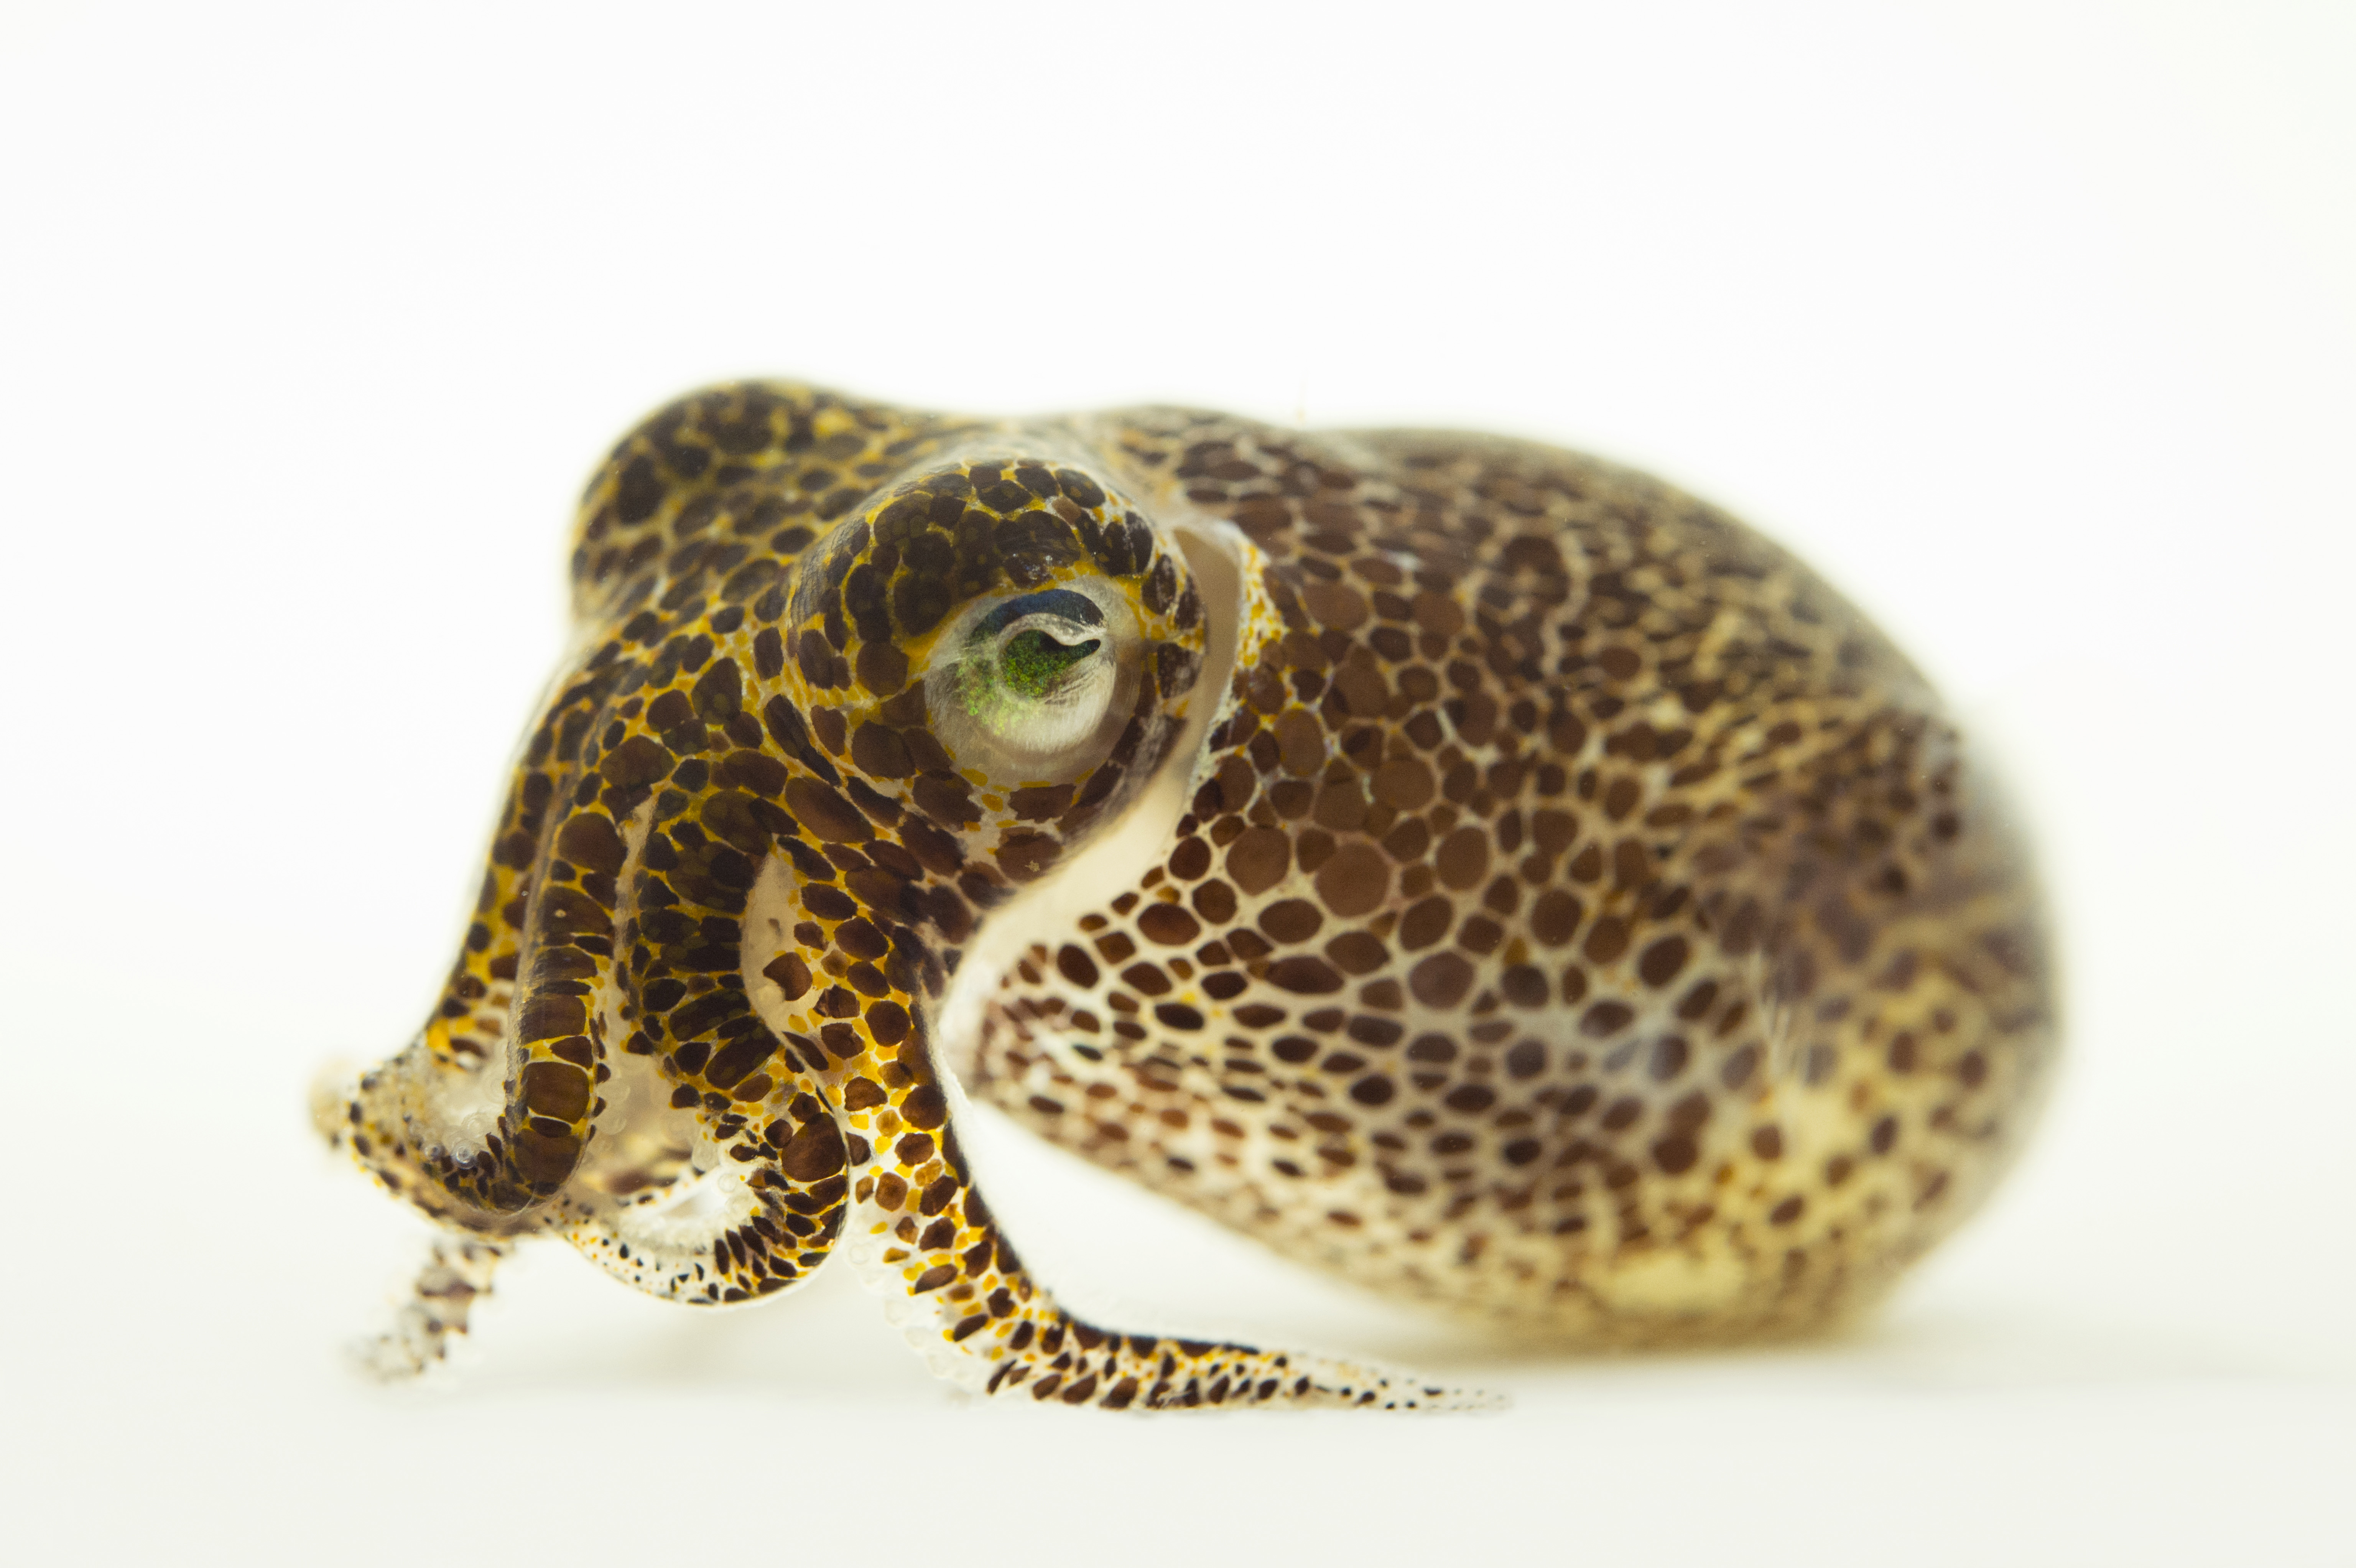 A bobtail squid on a white background